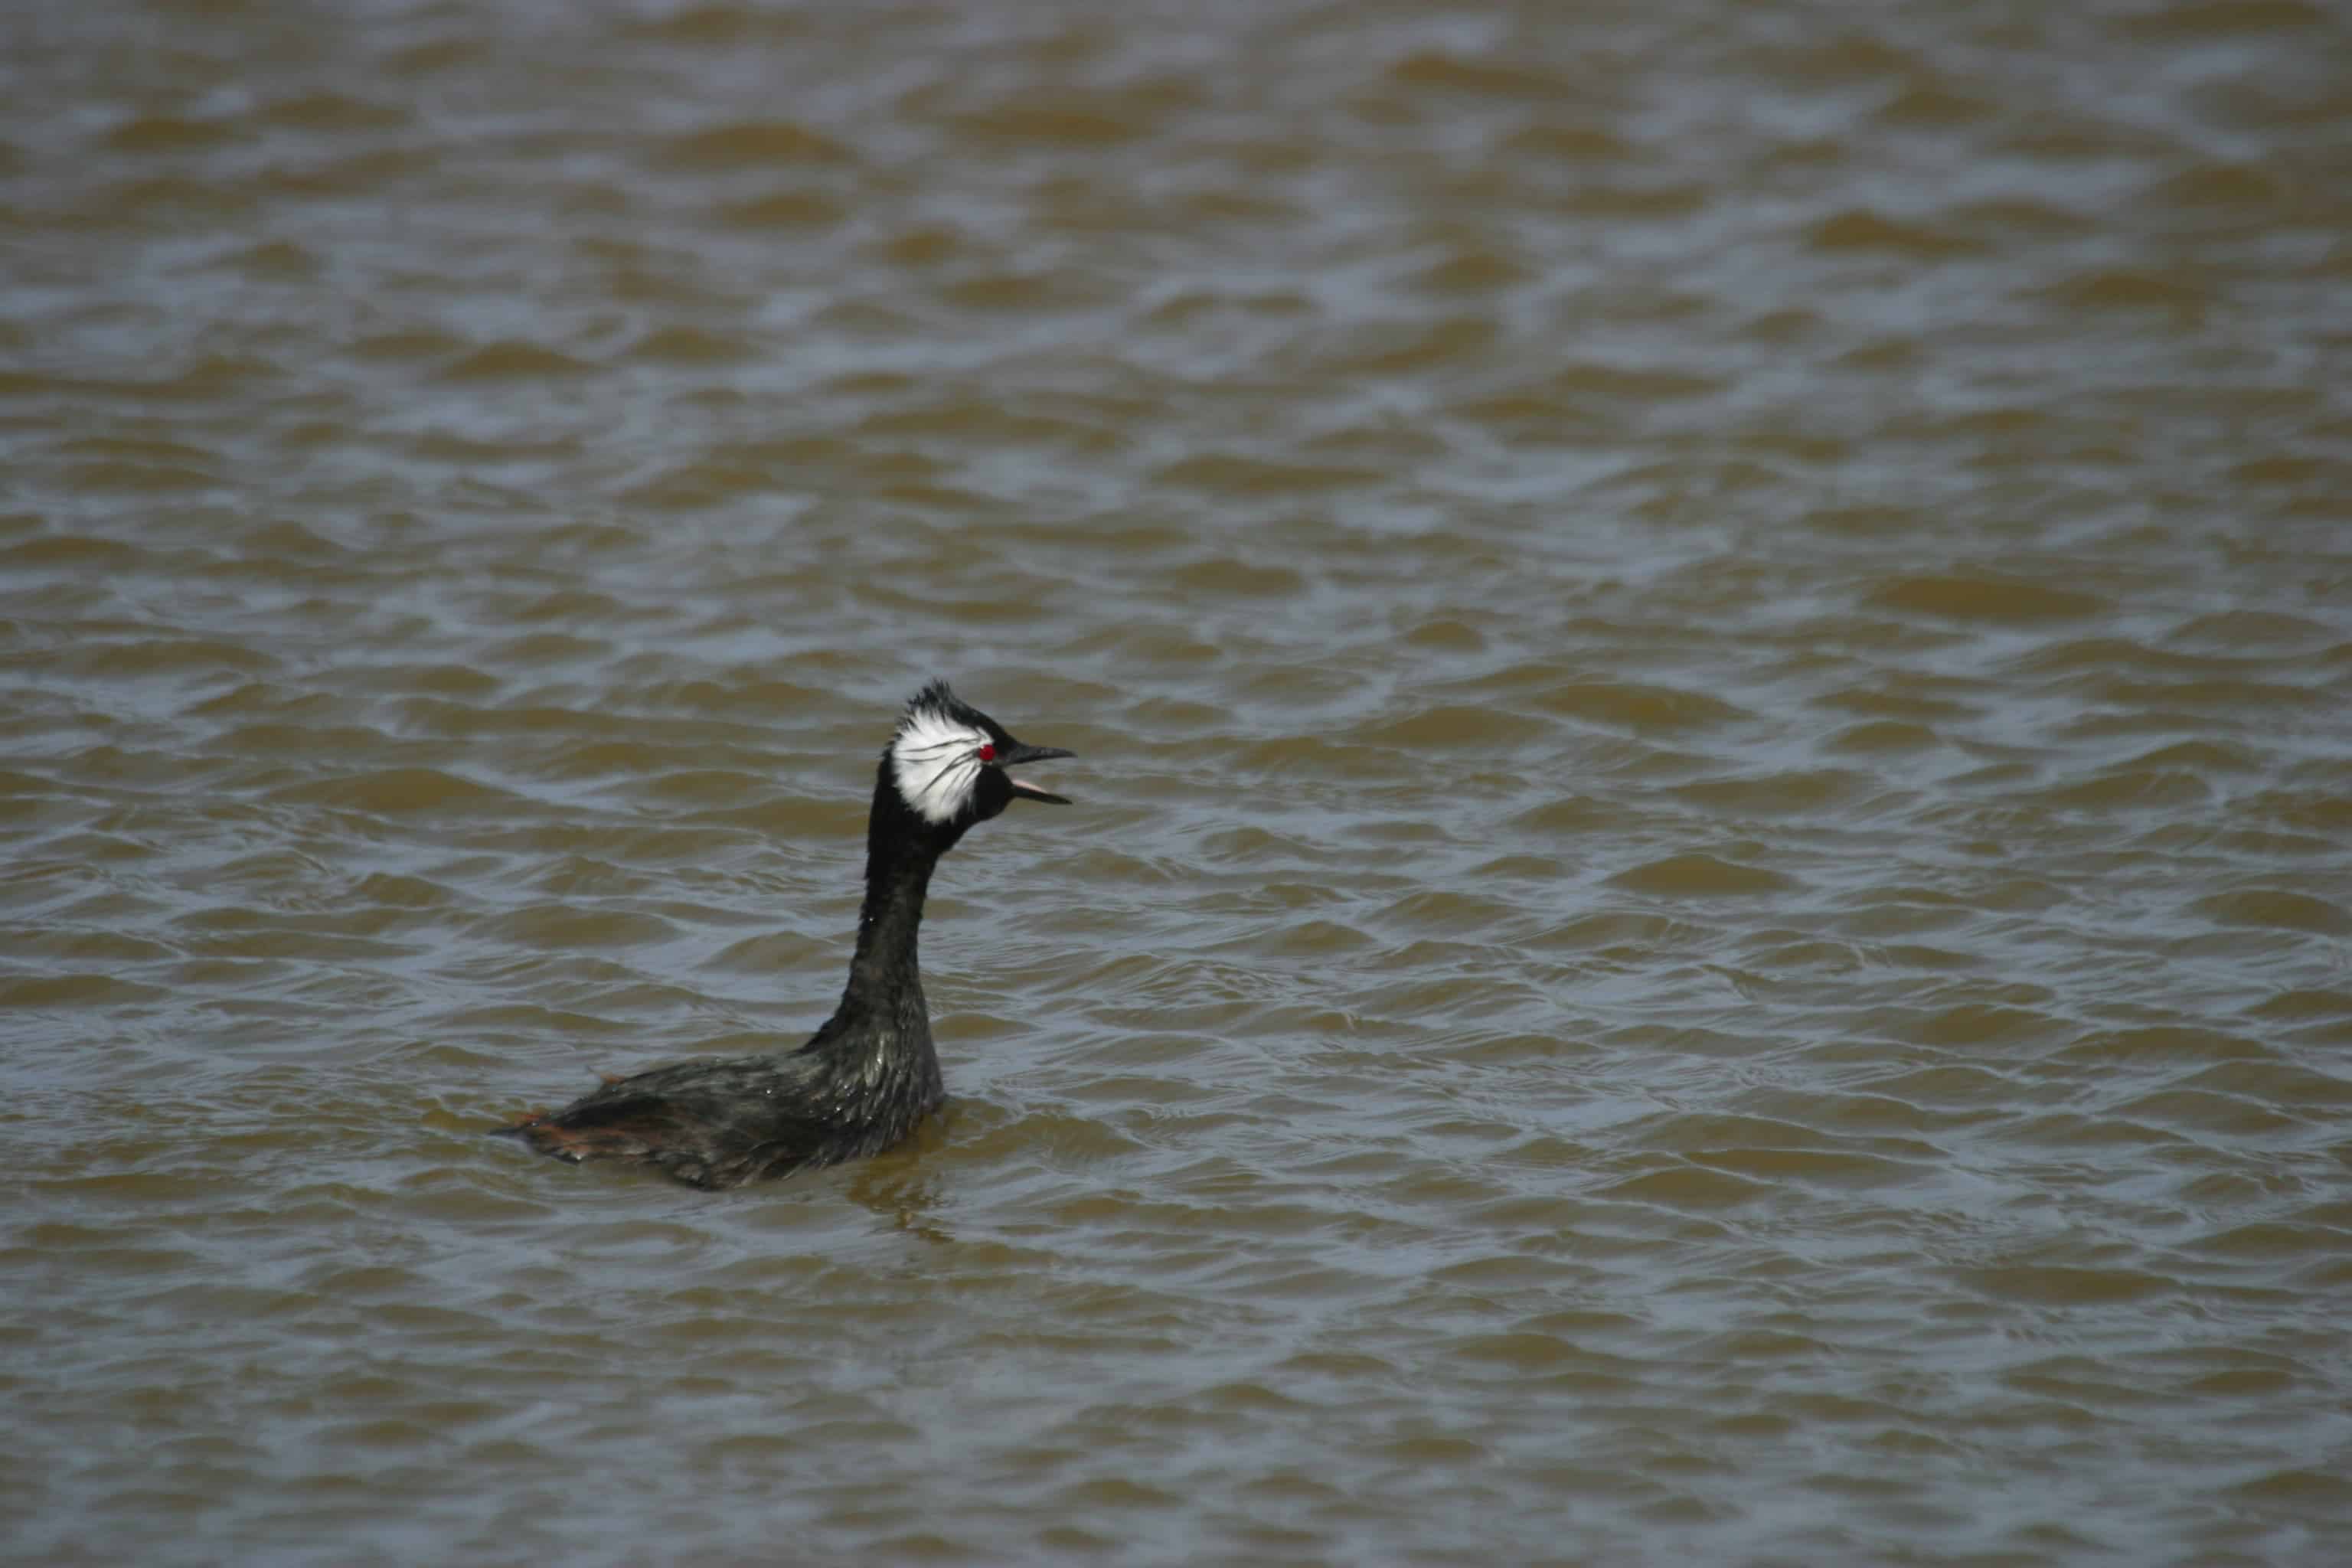 White-tufted grebe, subspecies (likely to be elevated to species) endemic to Falklands.